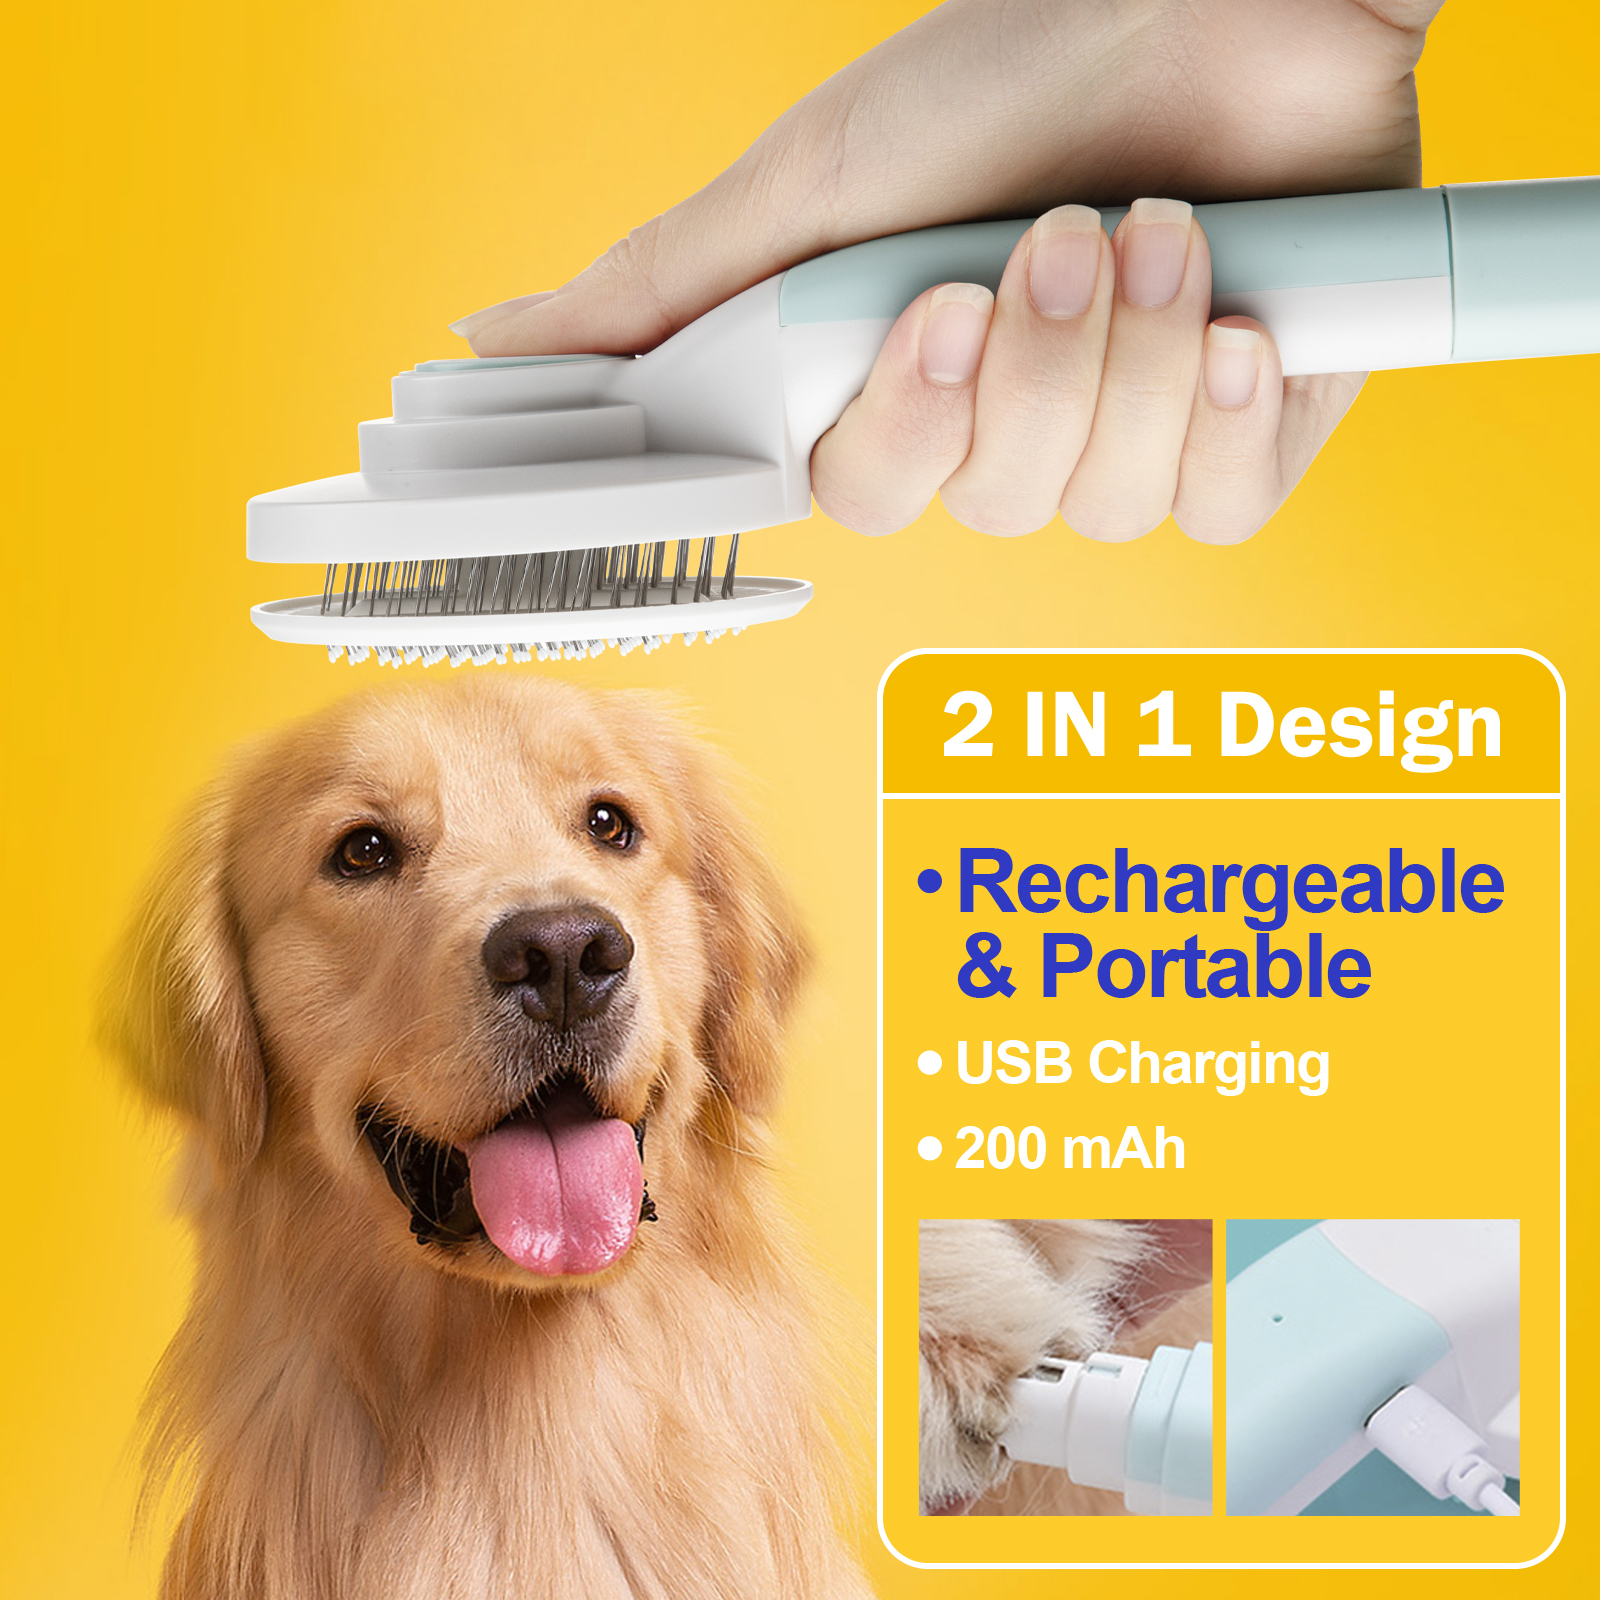 2IN1 Pet Brush Cat Dog Hair Grooming Comb Electric Cordless Nail Claw Grinder